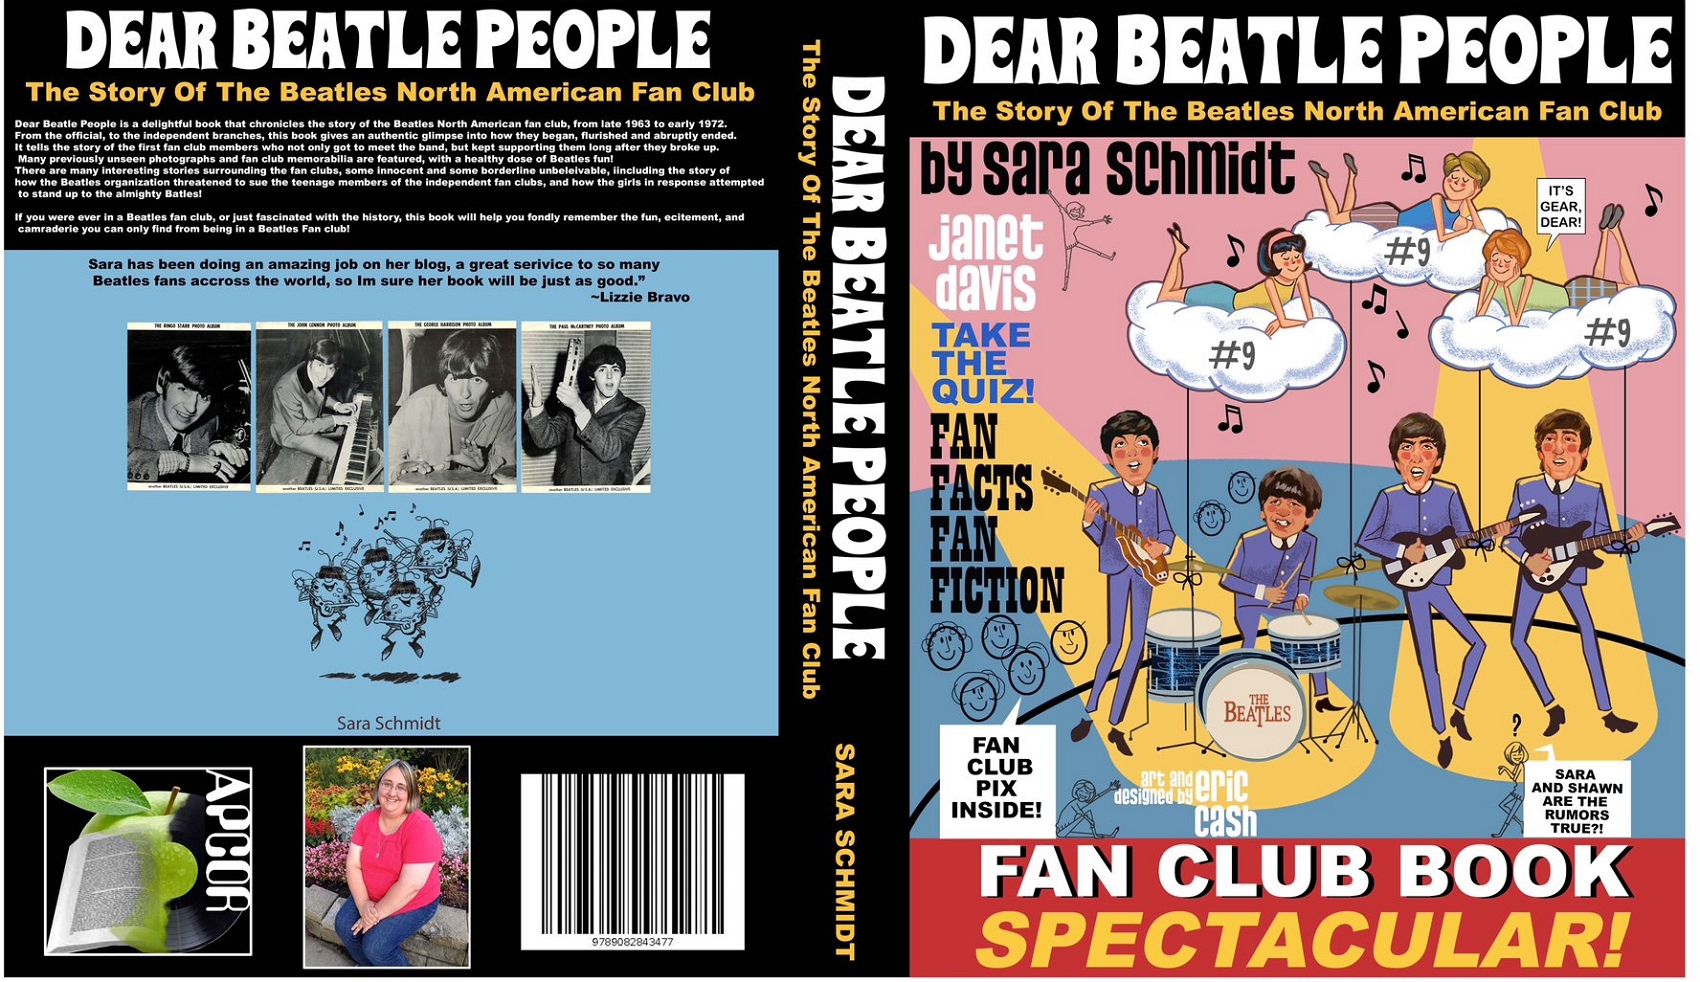 Premiere For The New Beatles Fan Club Book, Dear Beatle People, will be at The Fest For Beatles Fans in Jersey City, NJ, March 31 through April 2, 2023 1